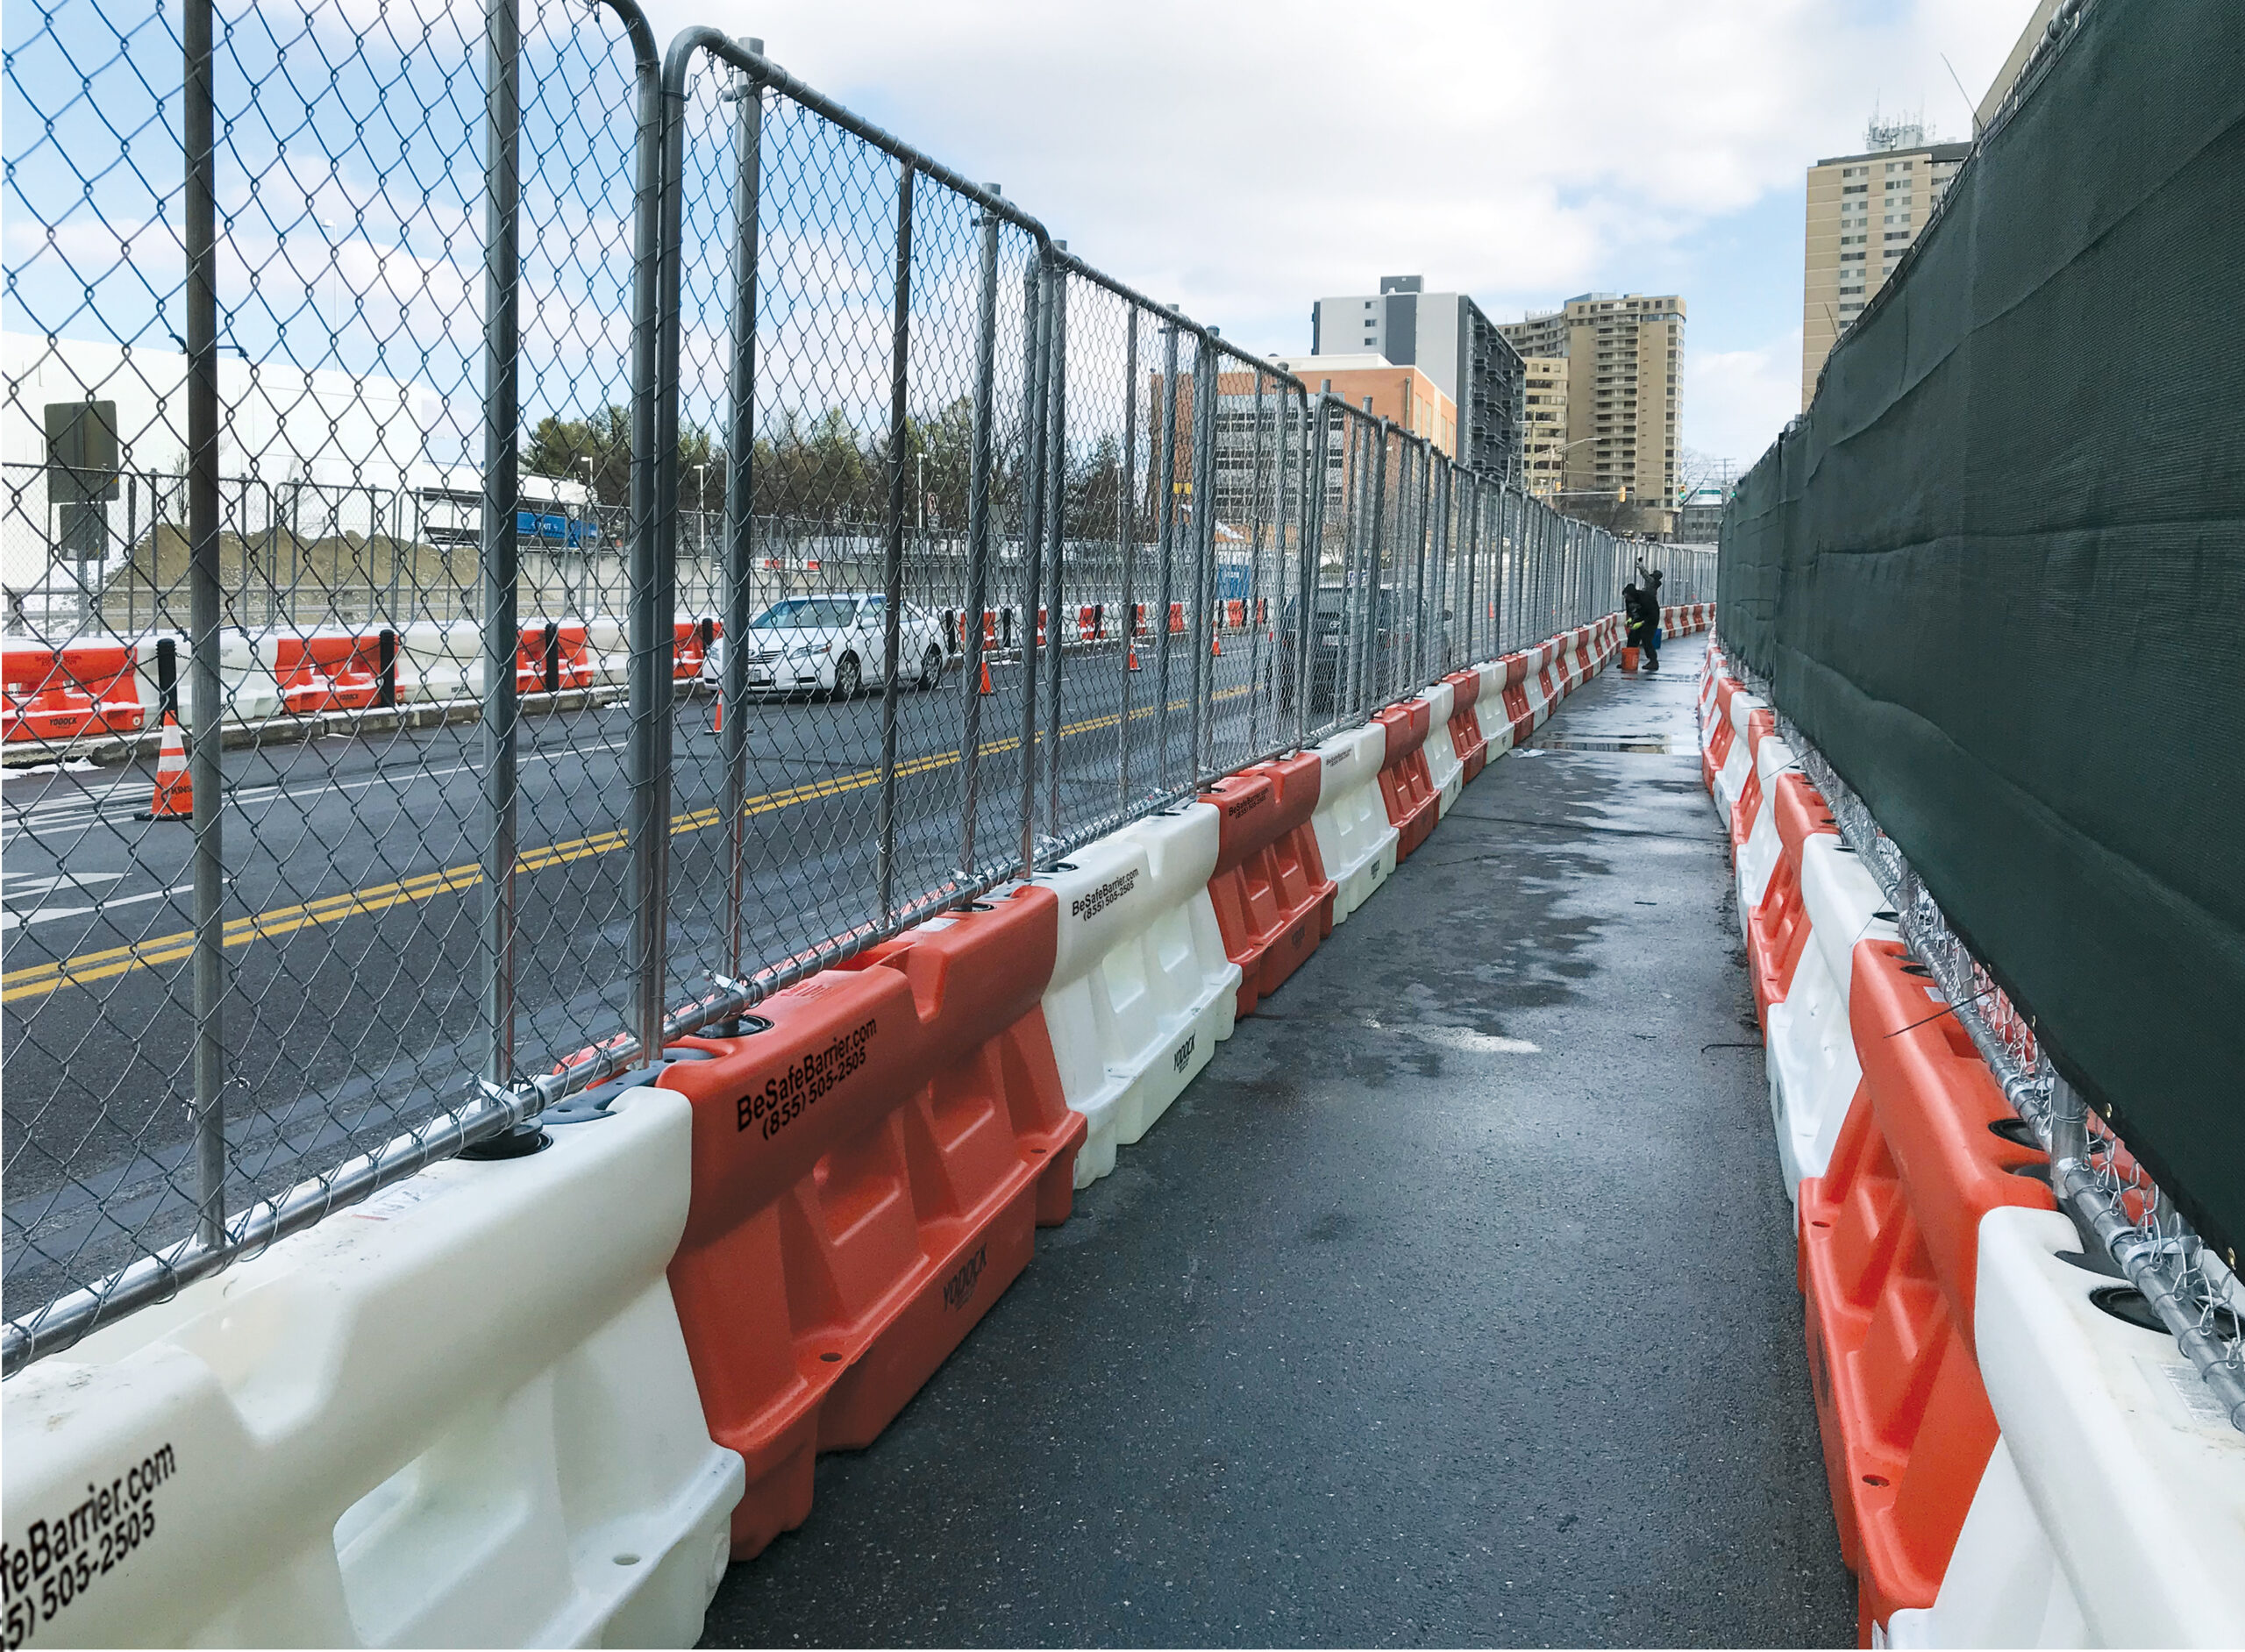 Pedestrian Lane delineation - barriers with fence on top